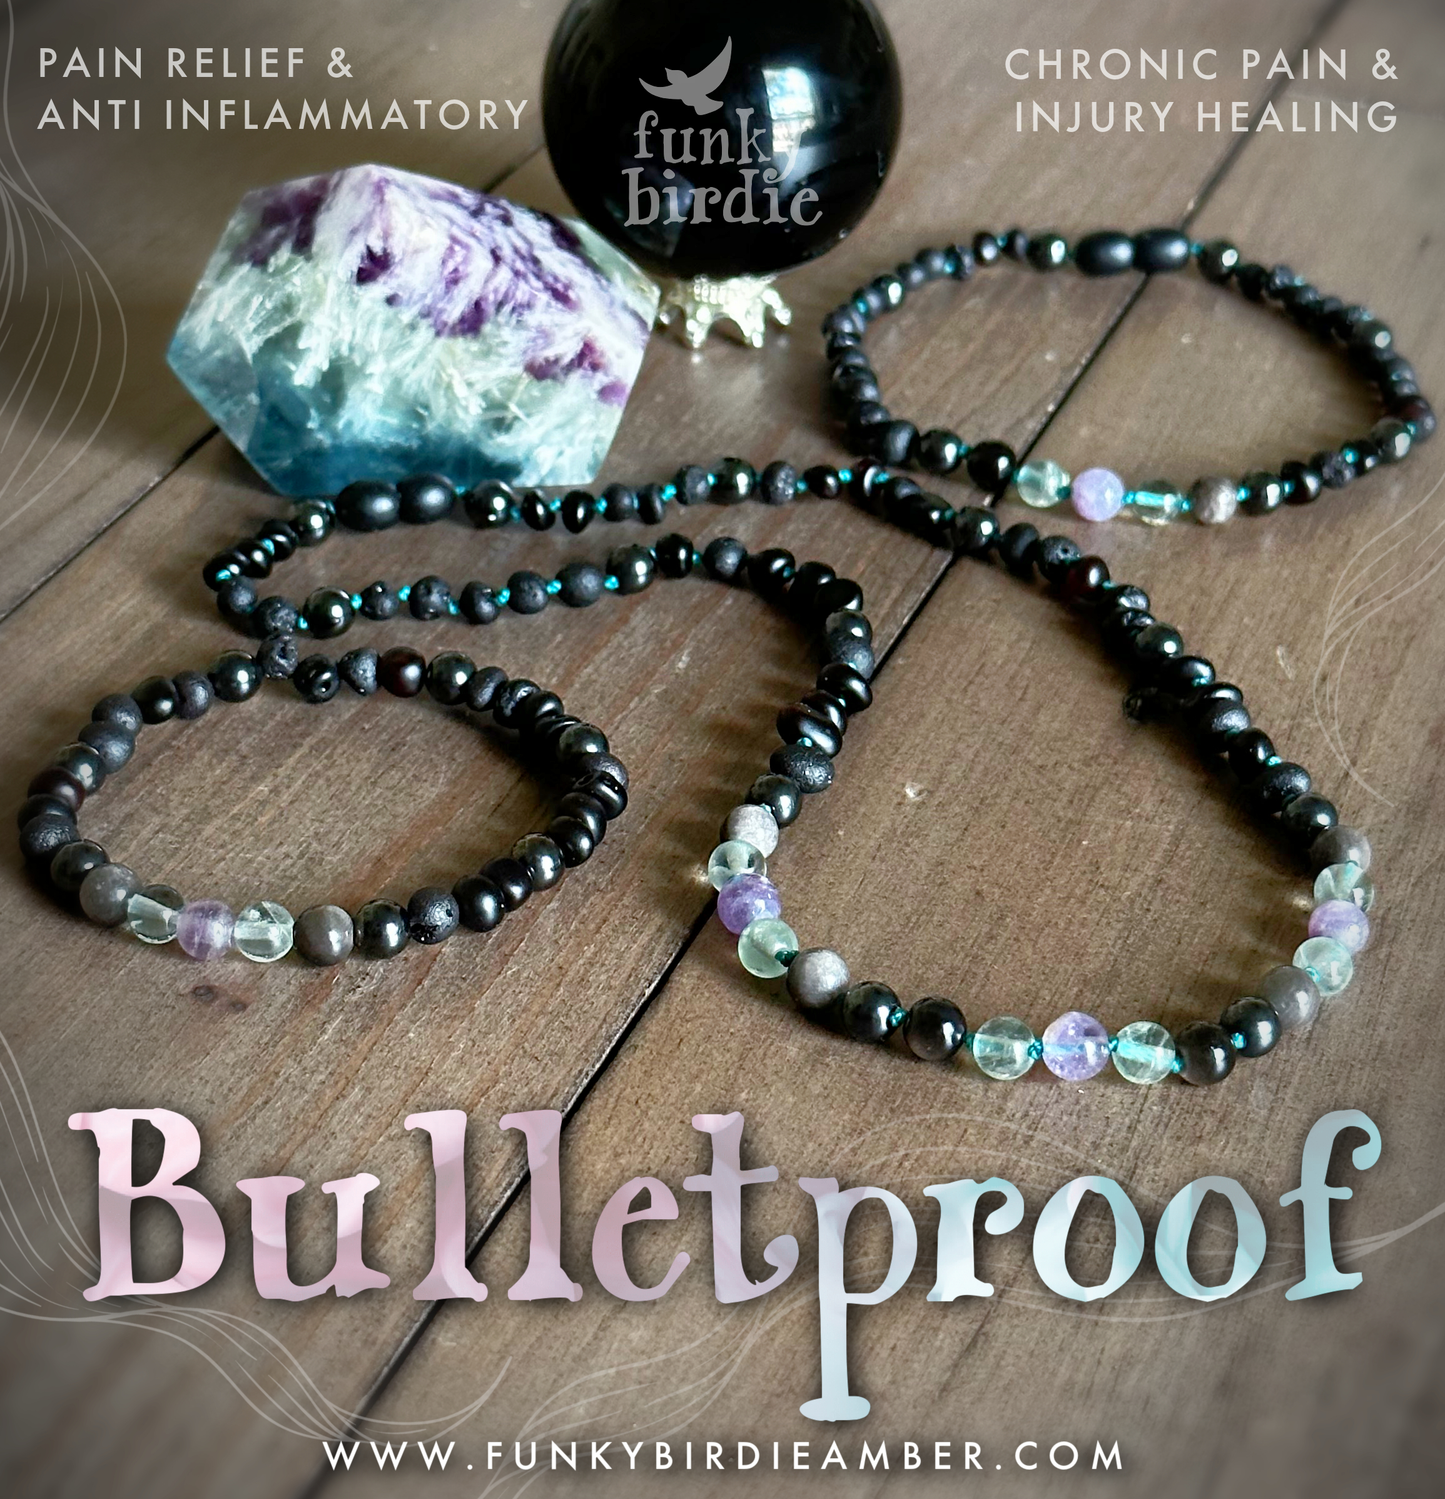 Bulletproof Anklet for Chronic Pain Relief